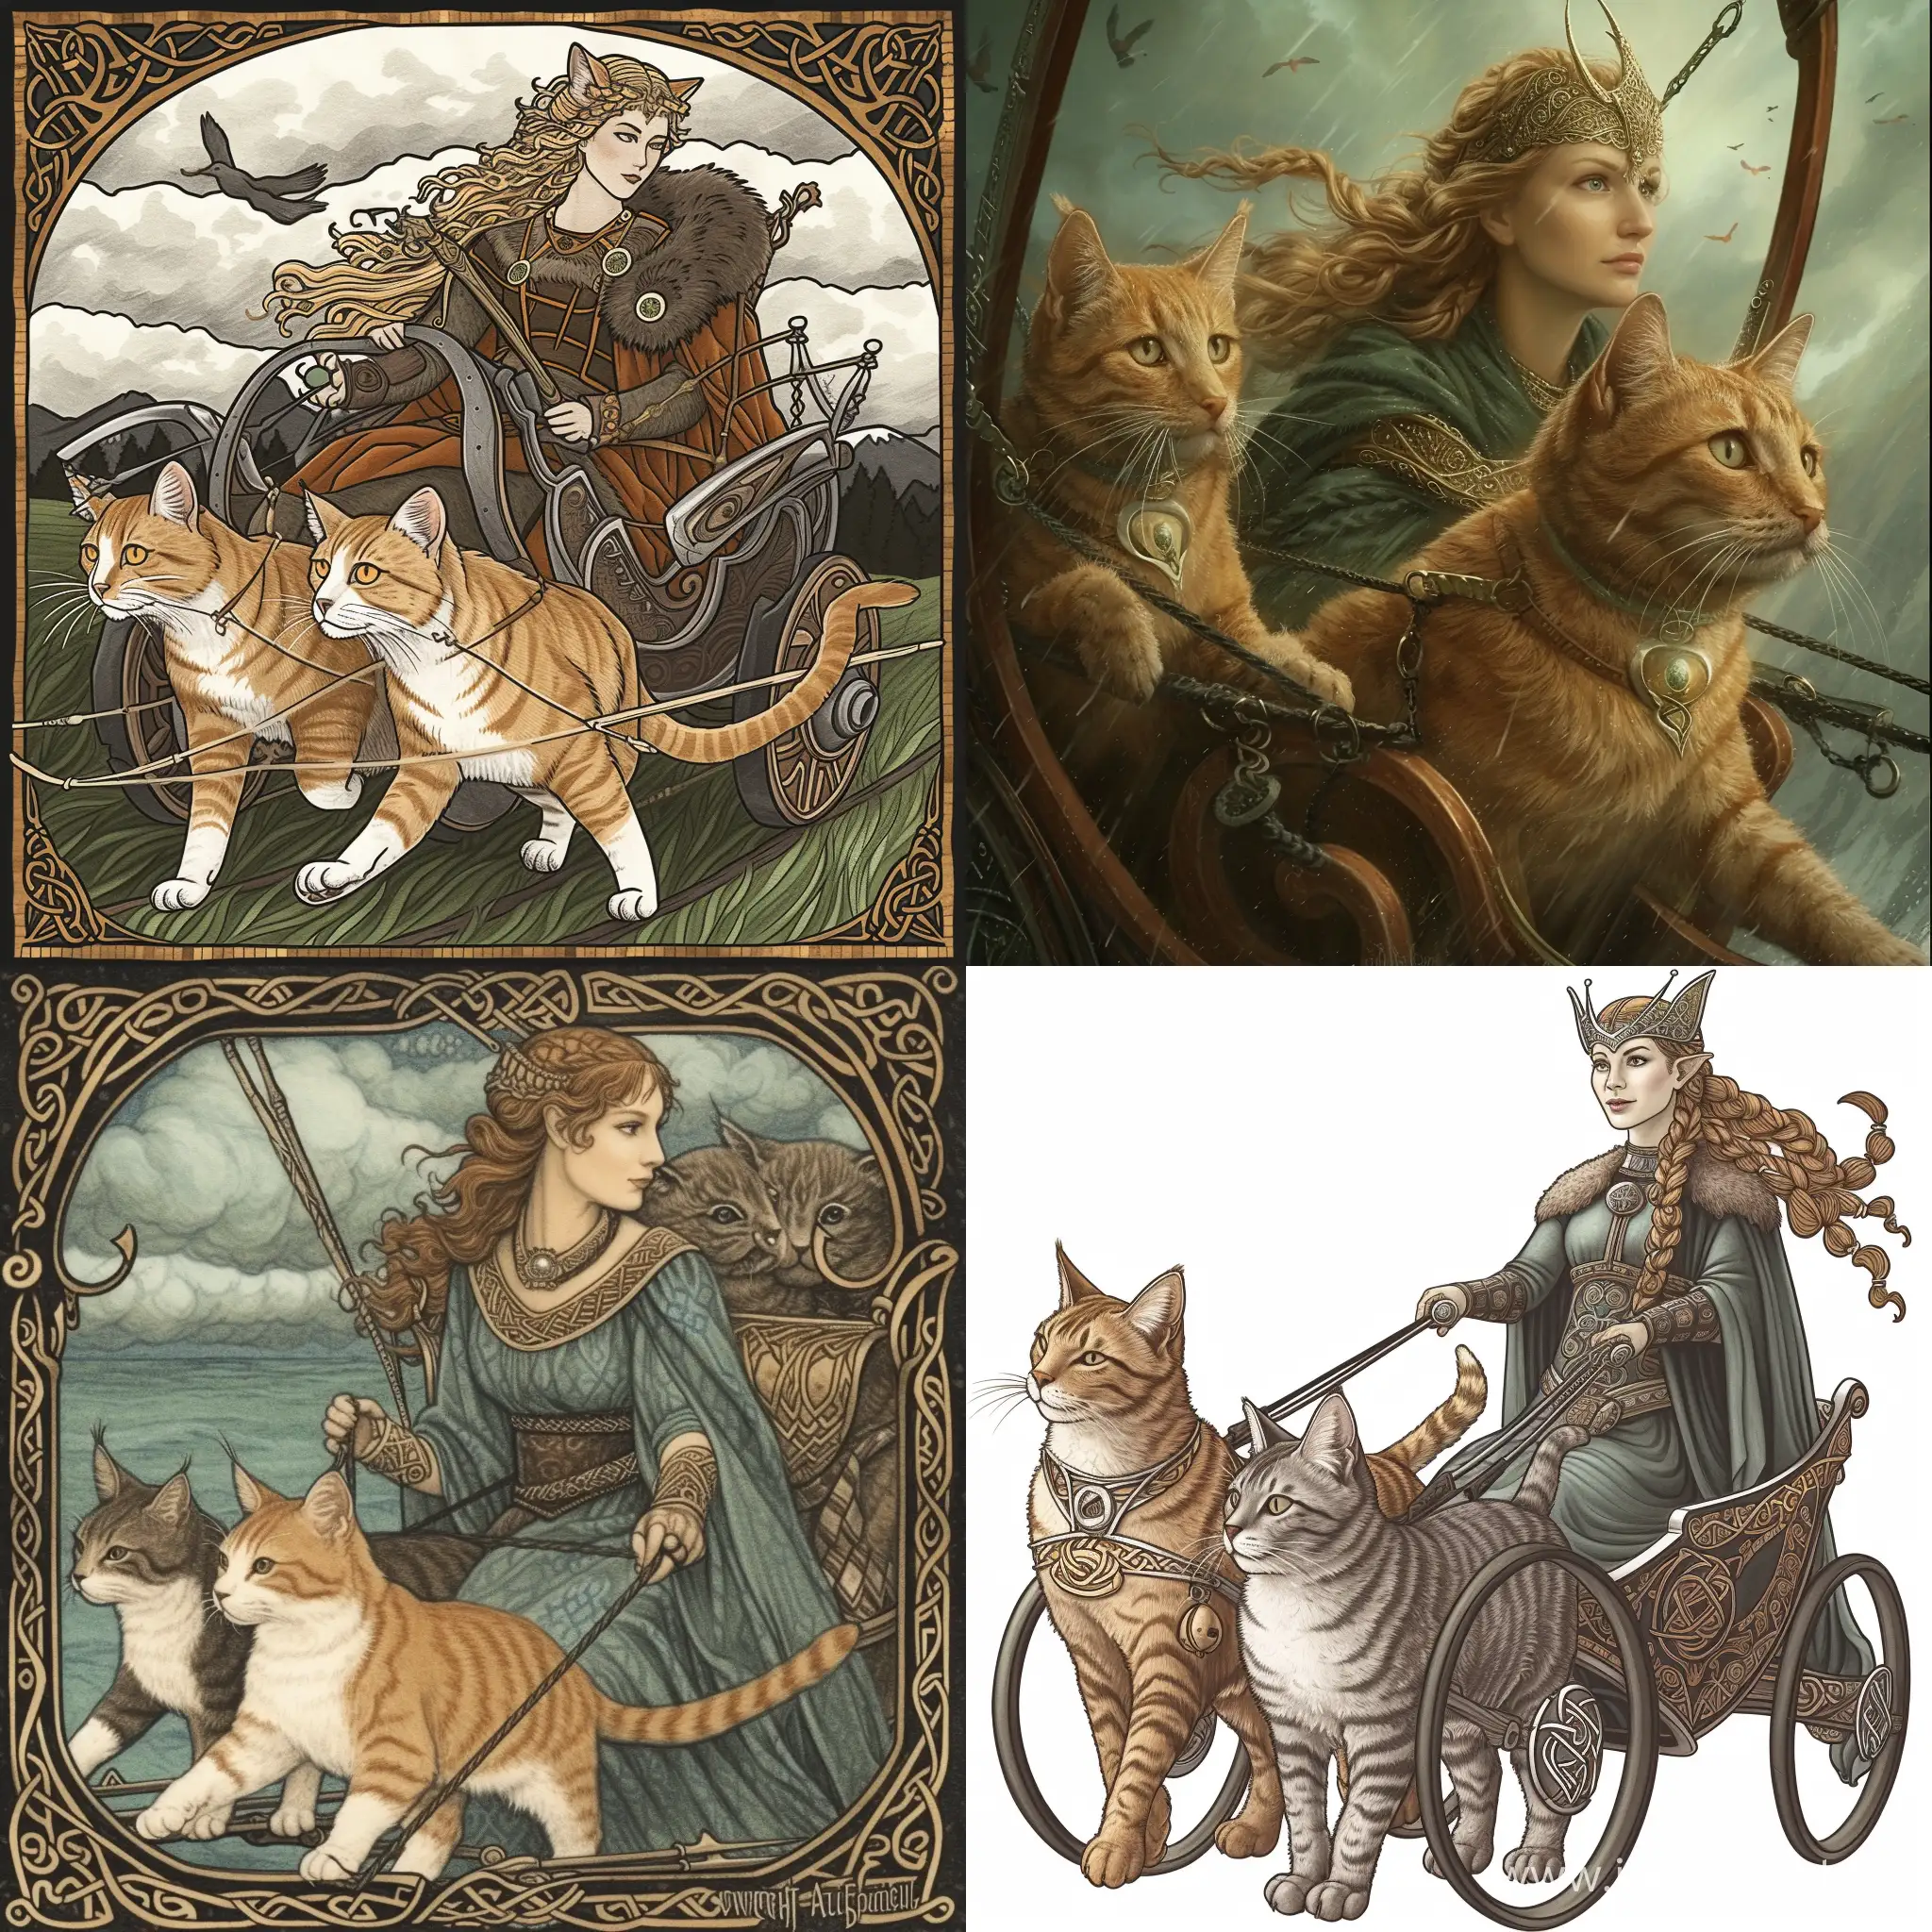 Goddess-Freyja-Riding-a-Chariot-Pulled-by-Majestic-Cats